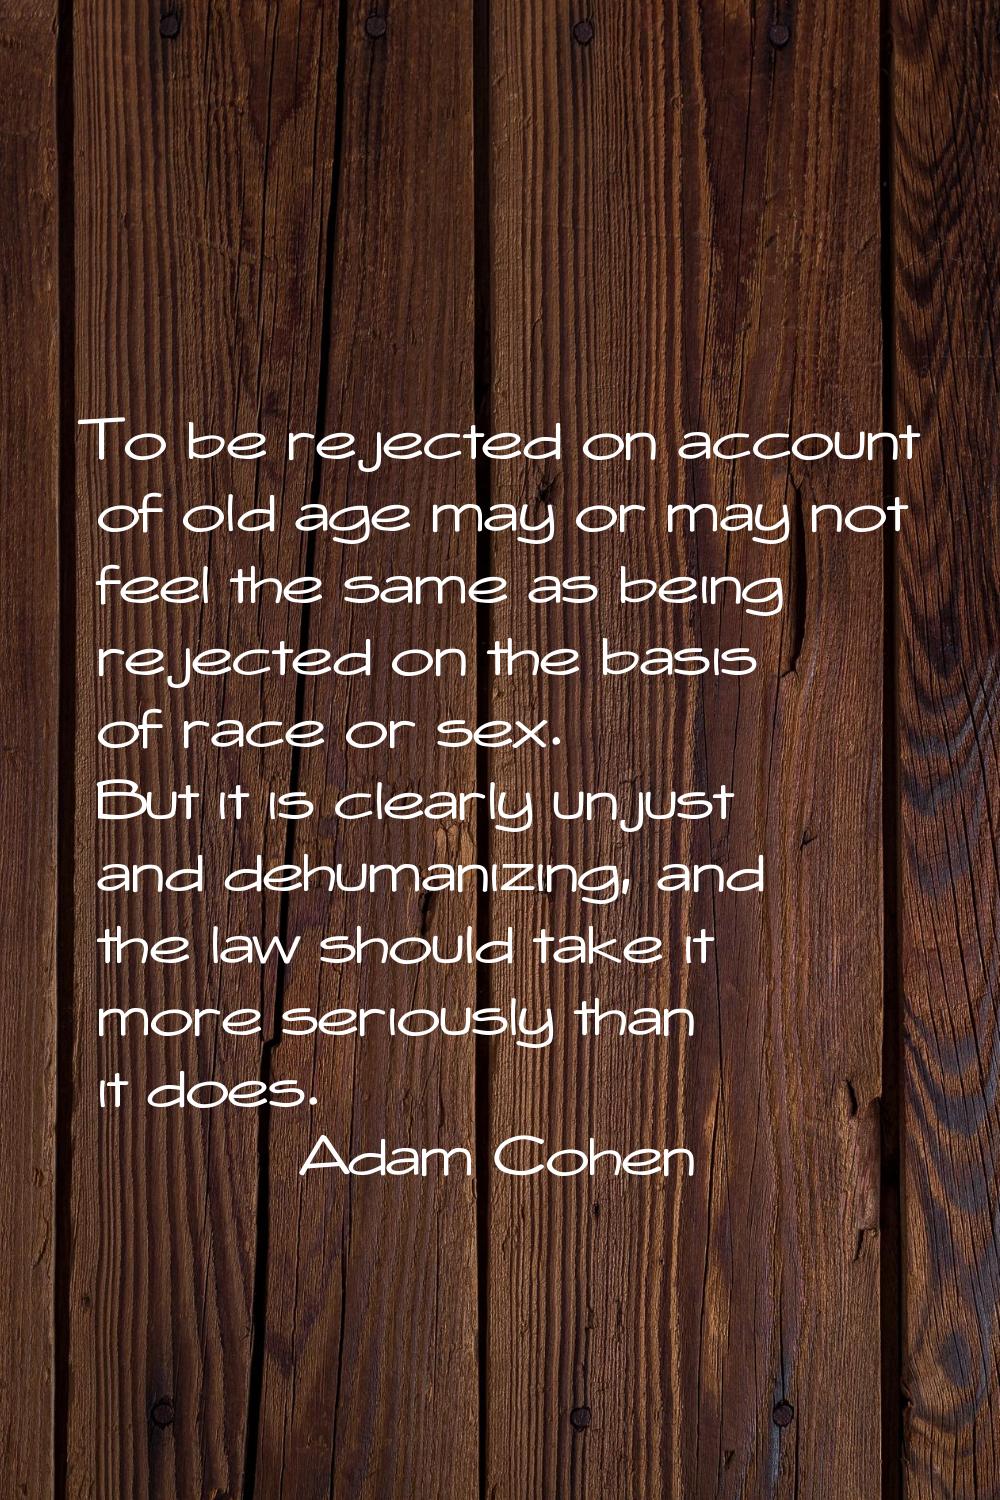 To be rejected on account of old age may or may not feel the same as being rejected on the basis of